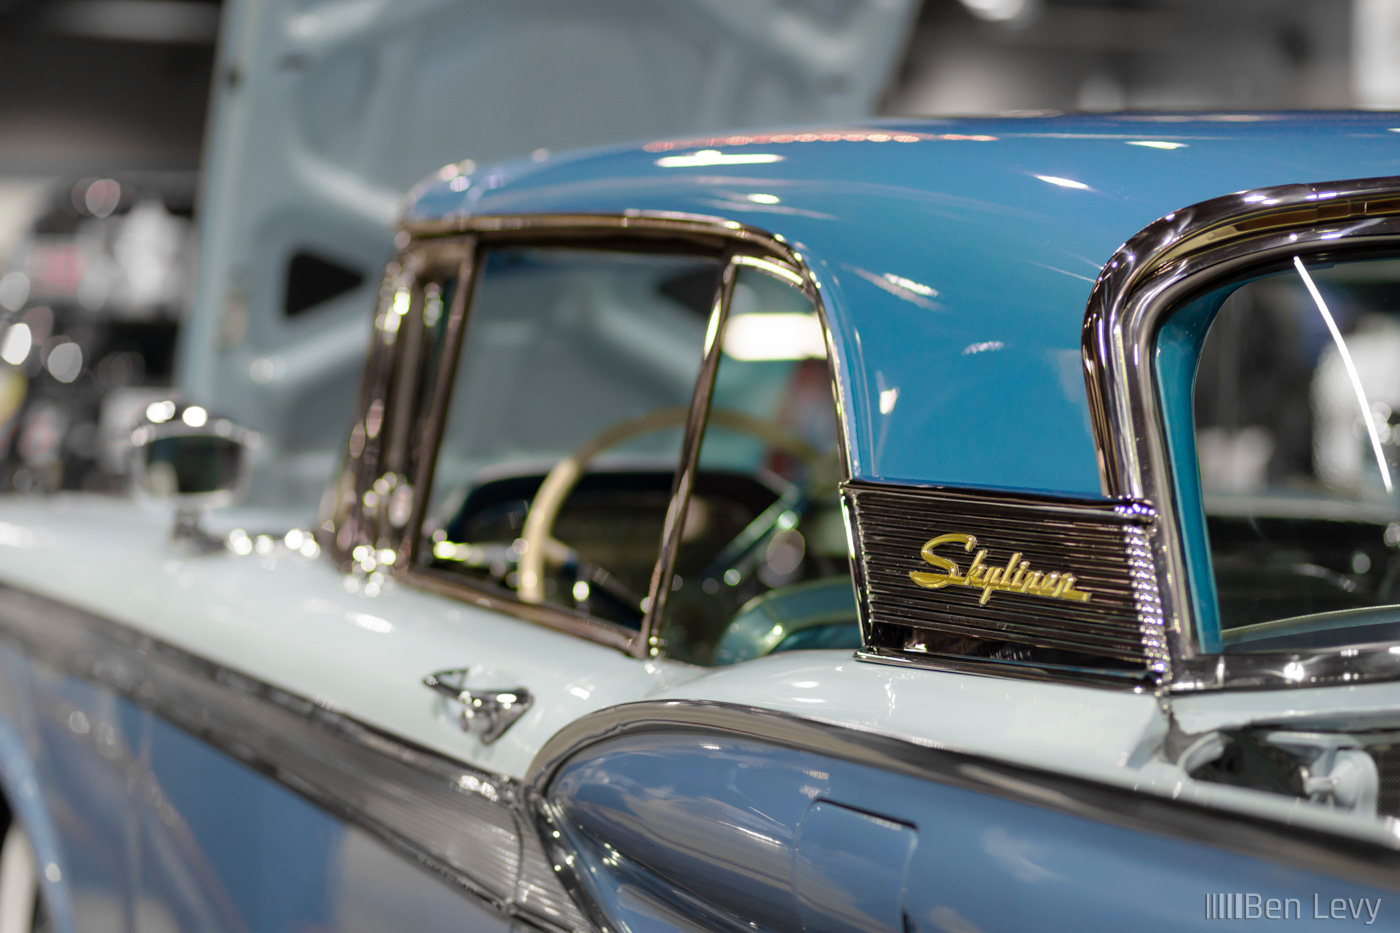 The Top of a Blue Ford Fairlane 500 Skyliner